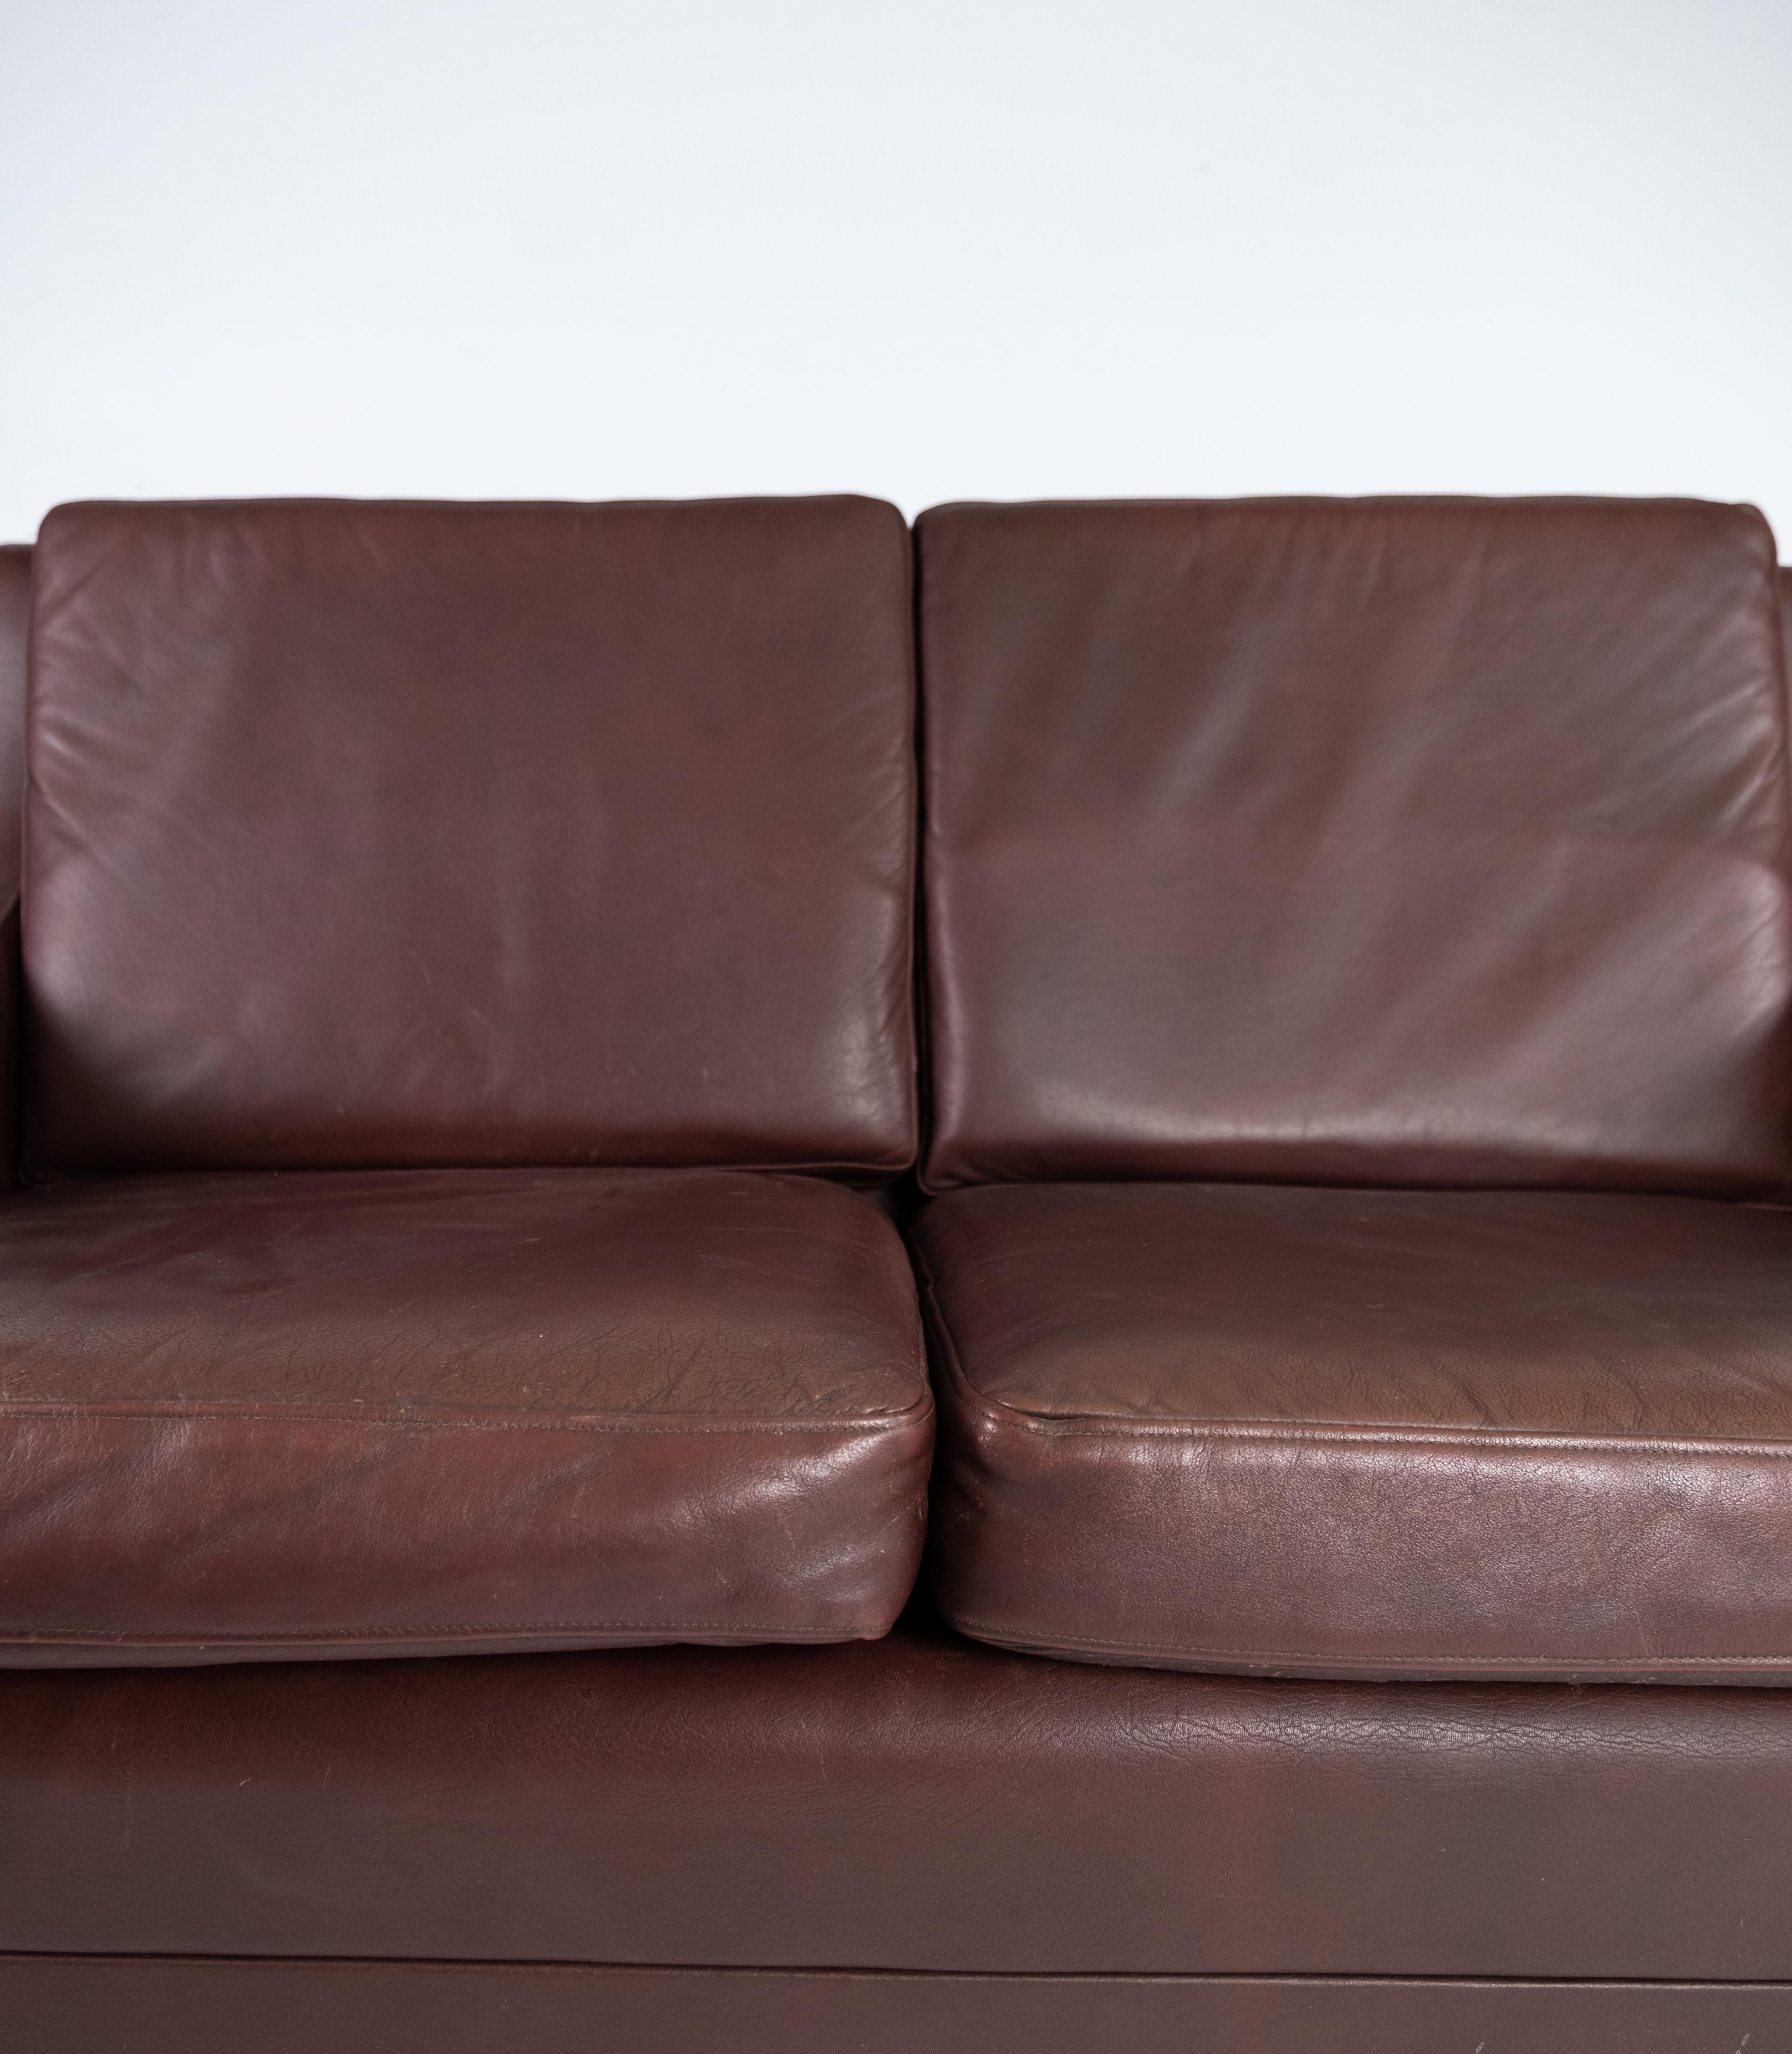 Two-Seat Sofa, with Red Brown Leather by Stouby Furniture 2